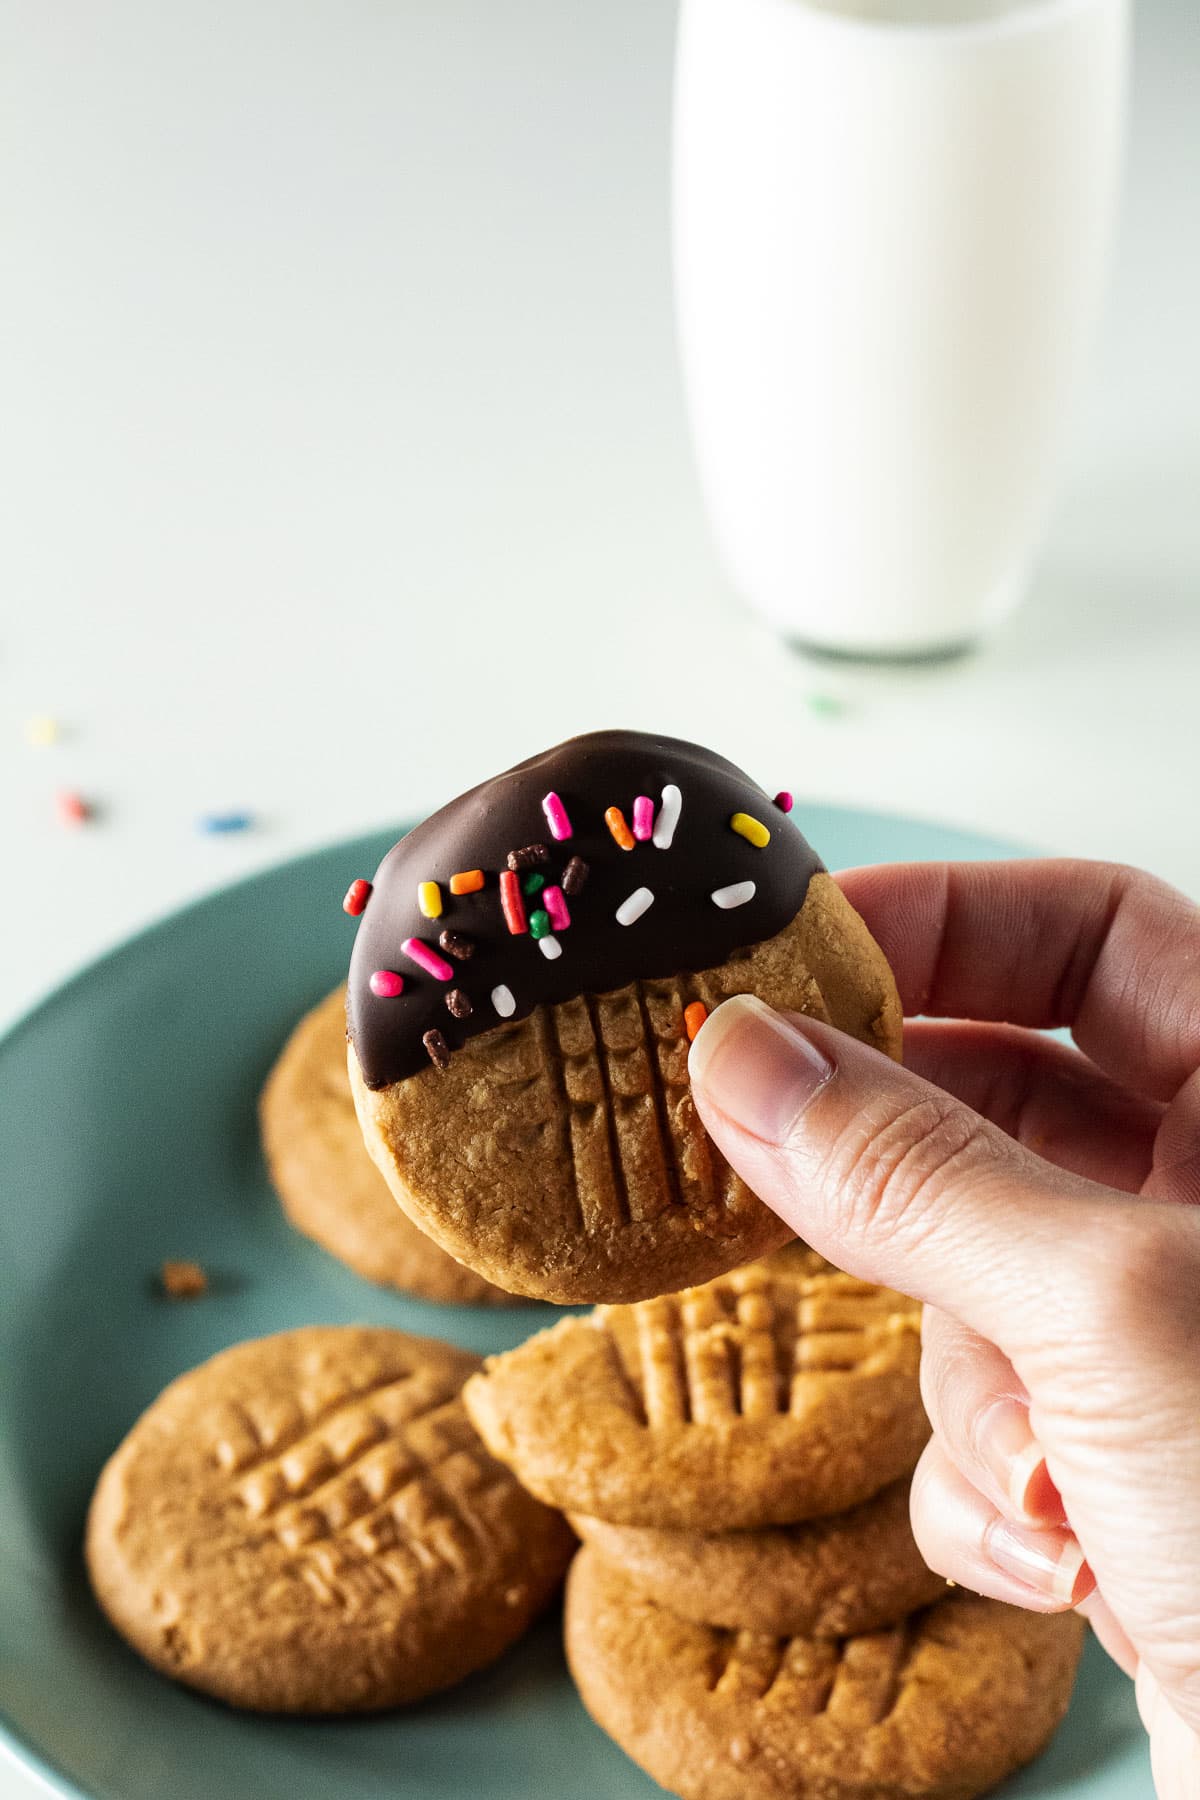 Hand holding chocolate dipped peanut butter cookie with sprinkles with a glass of milk in the background.